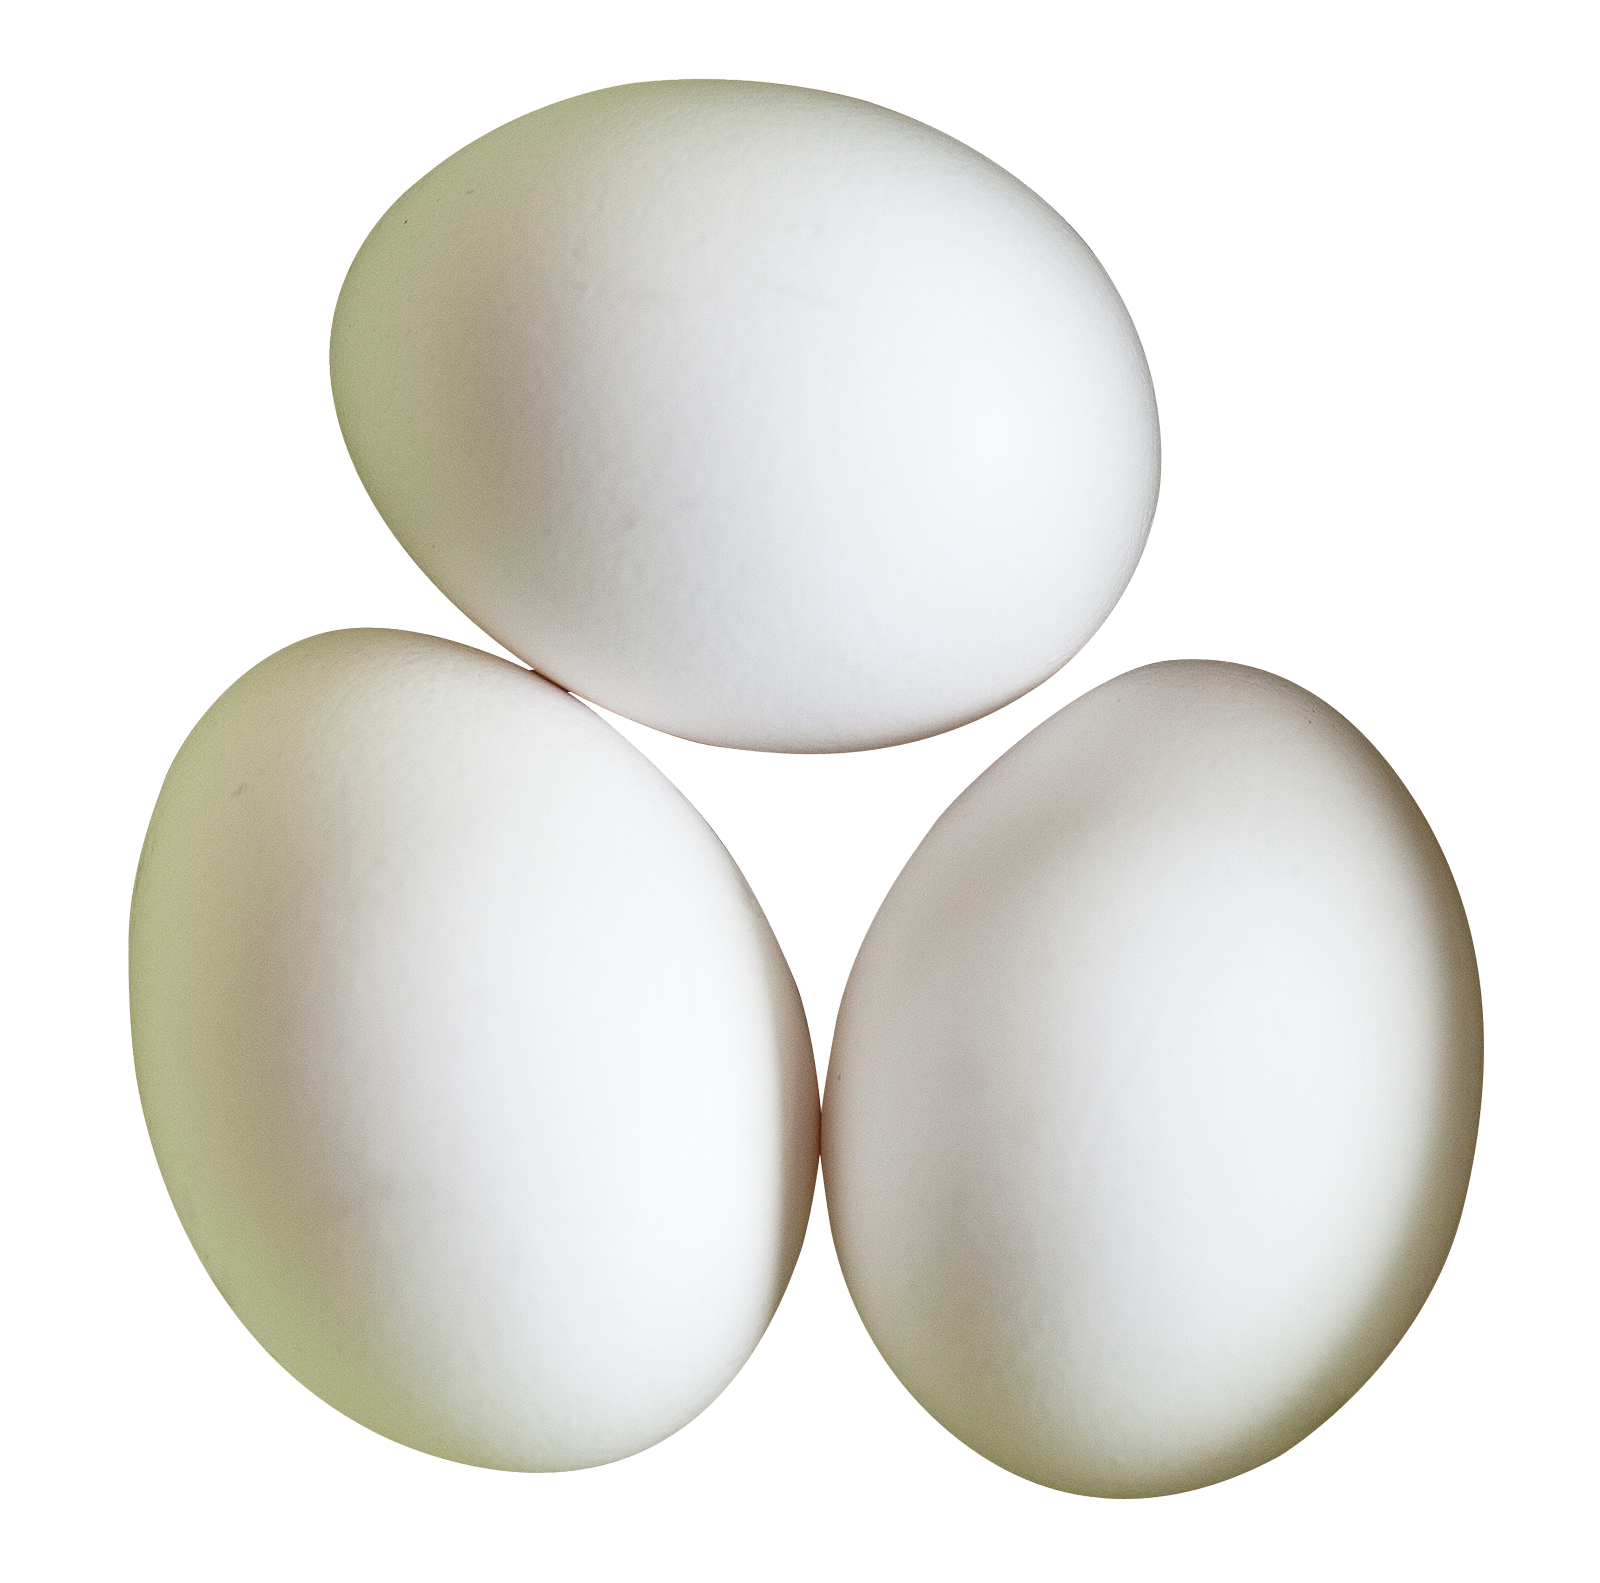 Three White Eggson Gray Background PNG image